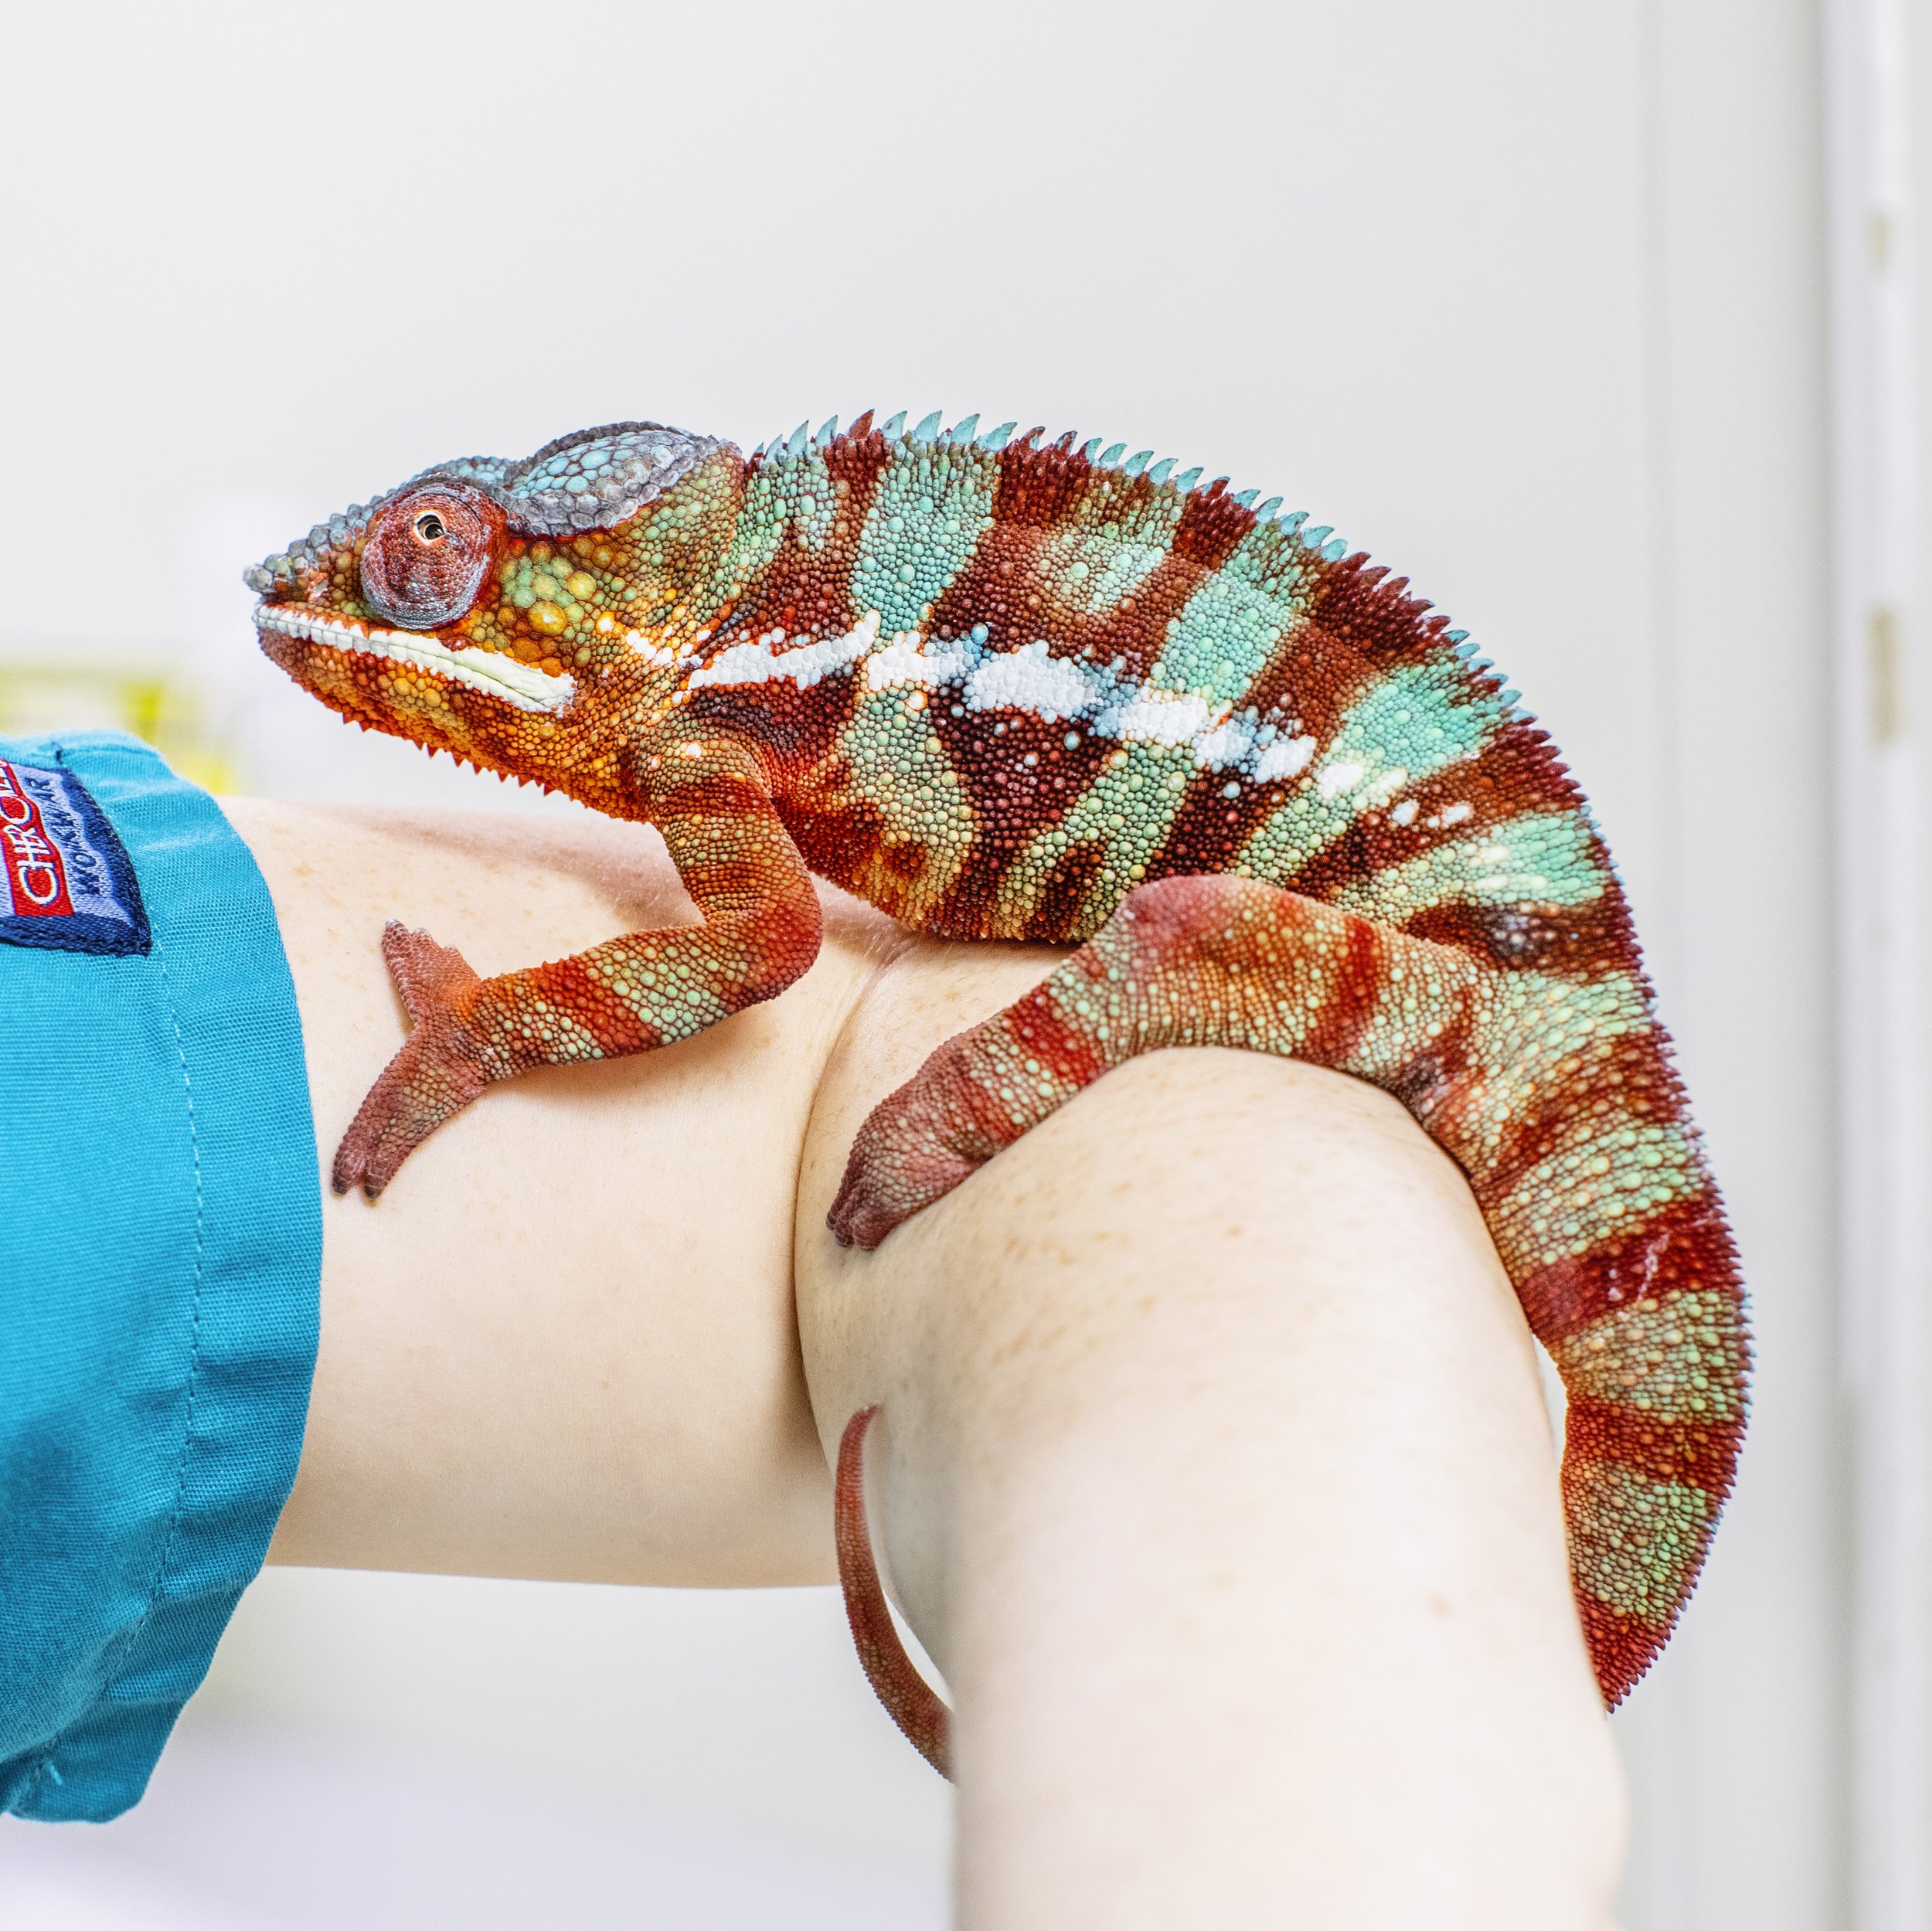 Caring For Your Pet Chameleon